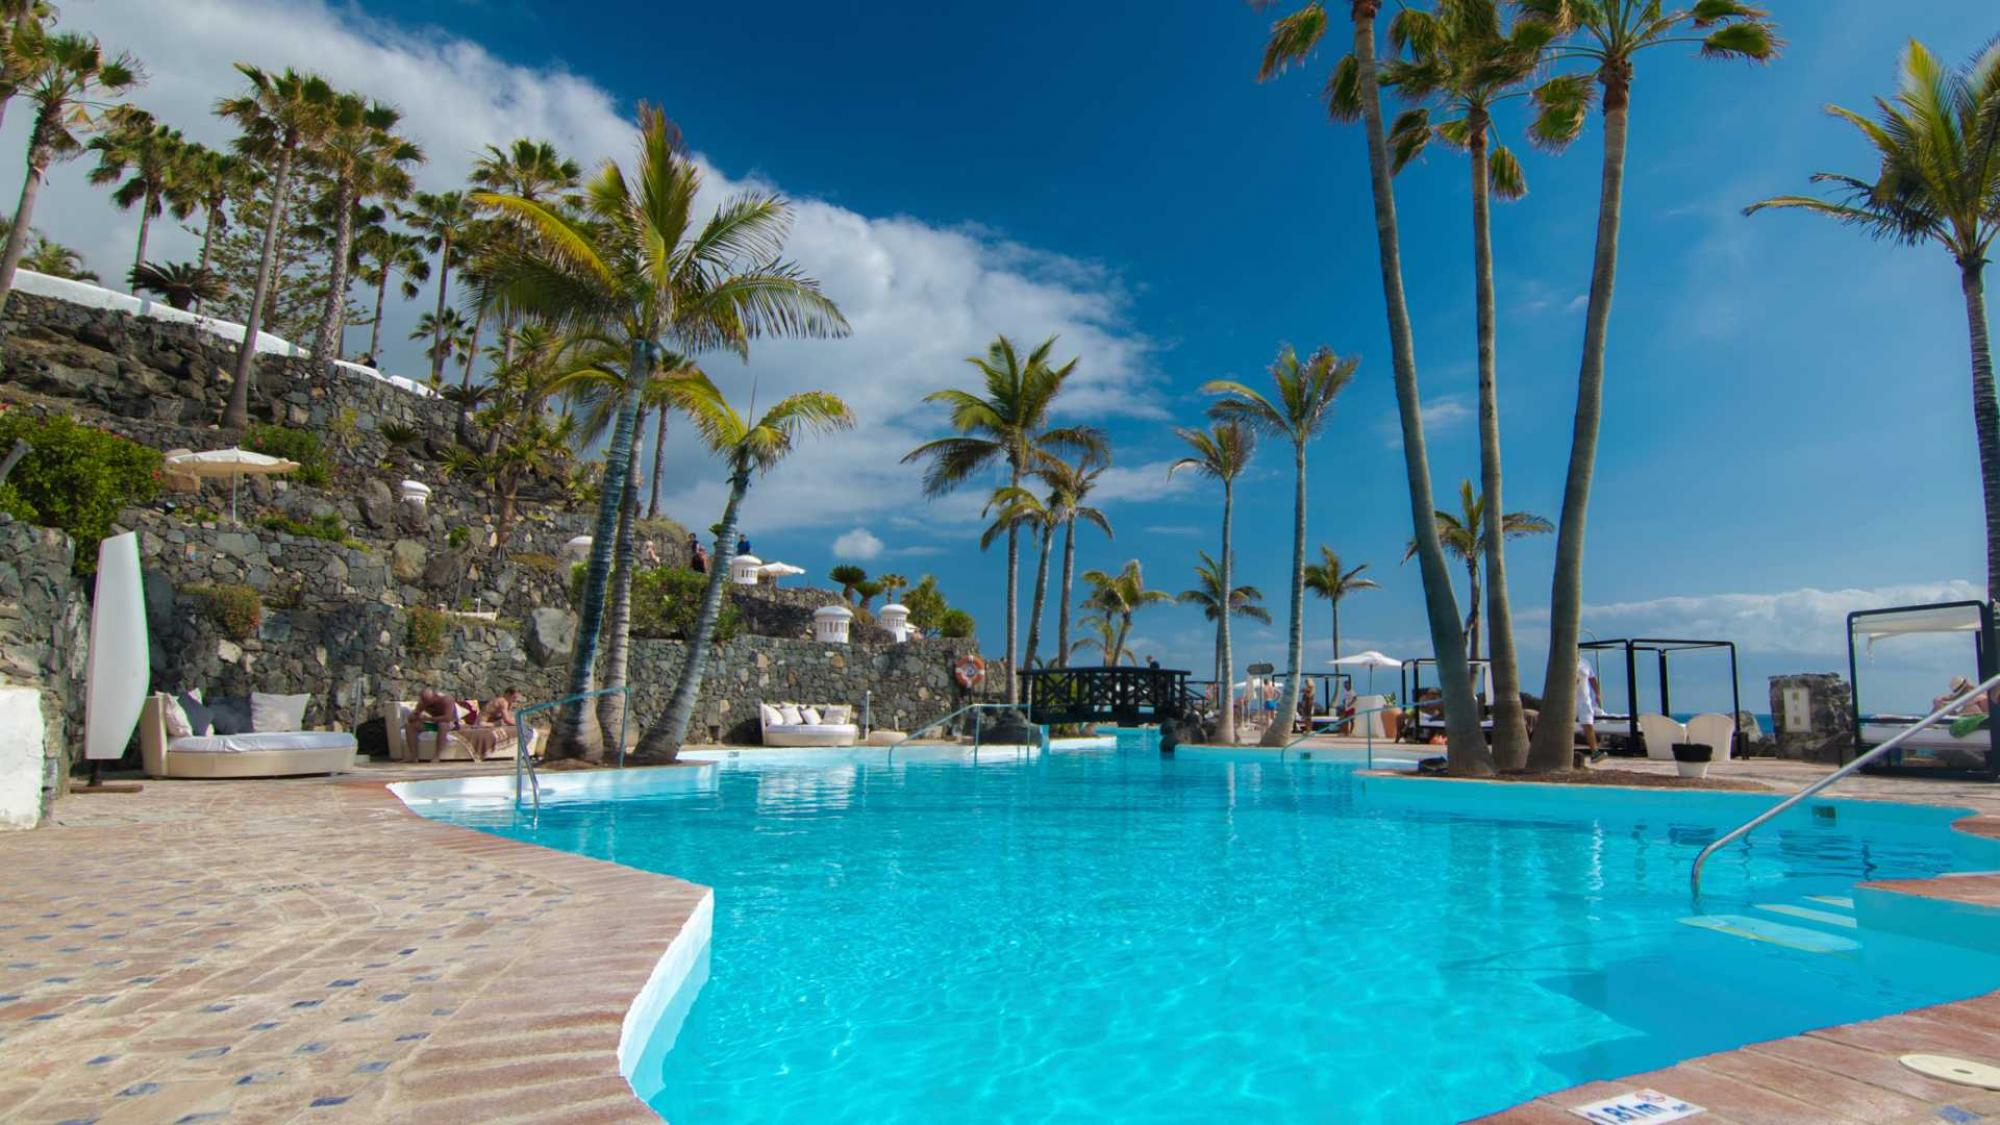 Hotel Jardin Tropical, Book Your Golf Trip In Tenerife avec Hotel Jardin Tropical Tenerife